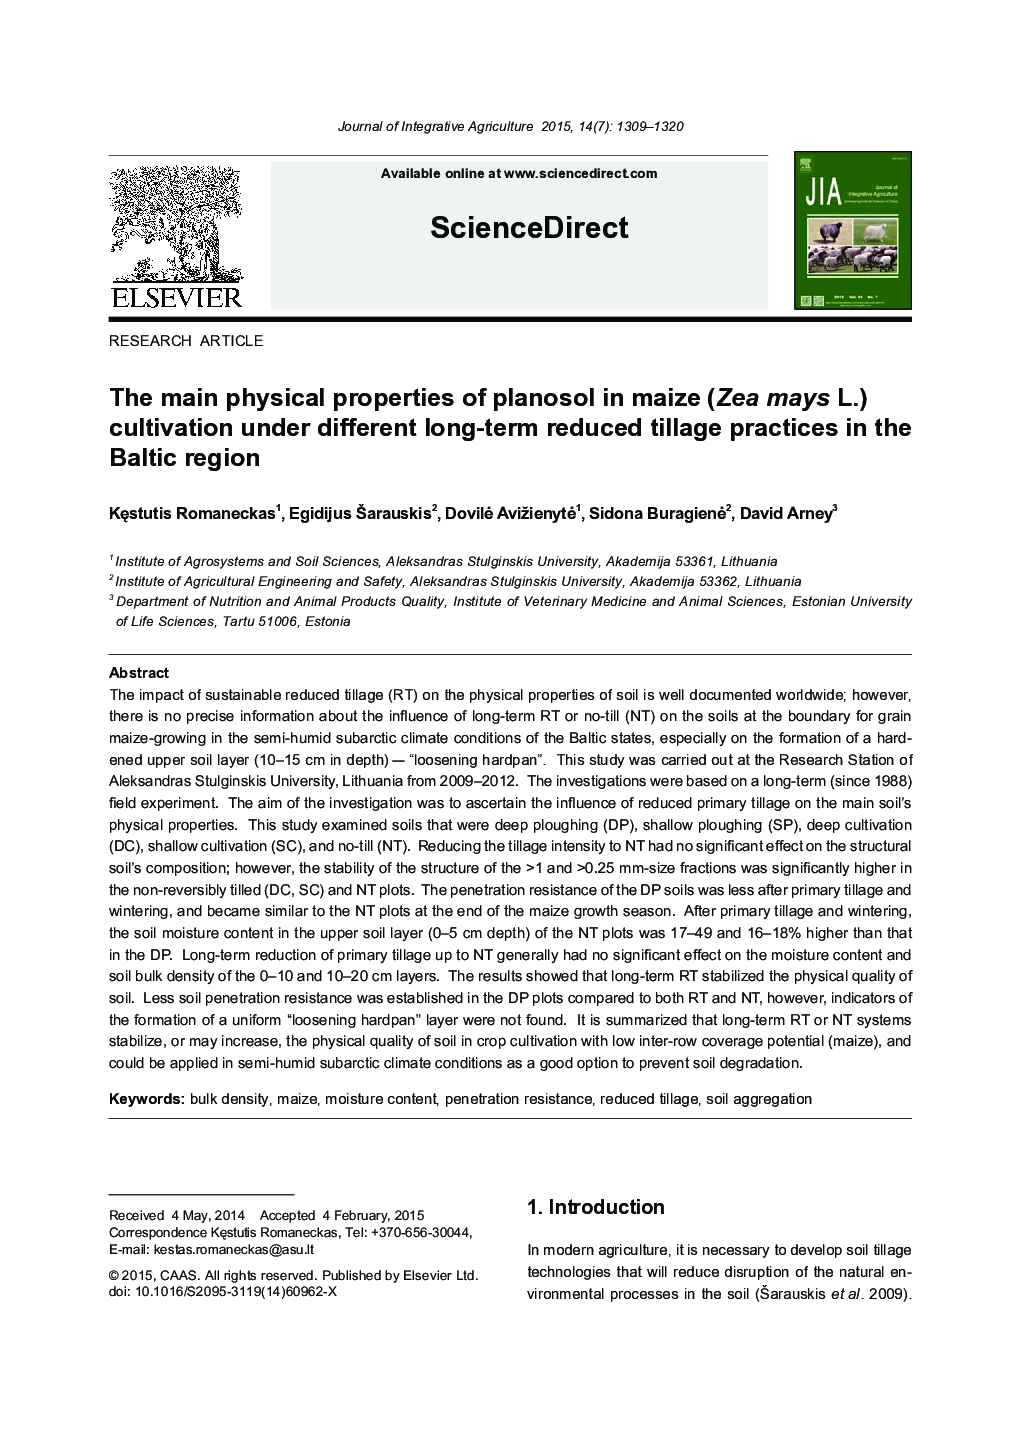 The main physical properties of planosol in maize (Zea mays L.) cultivation under different long-term reduced tillage practices in the Baltic region